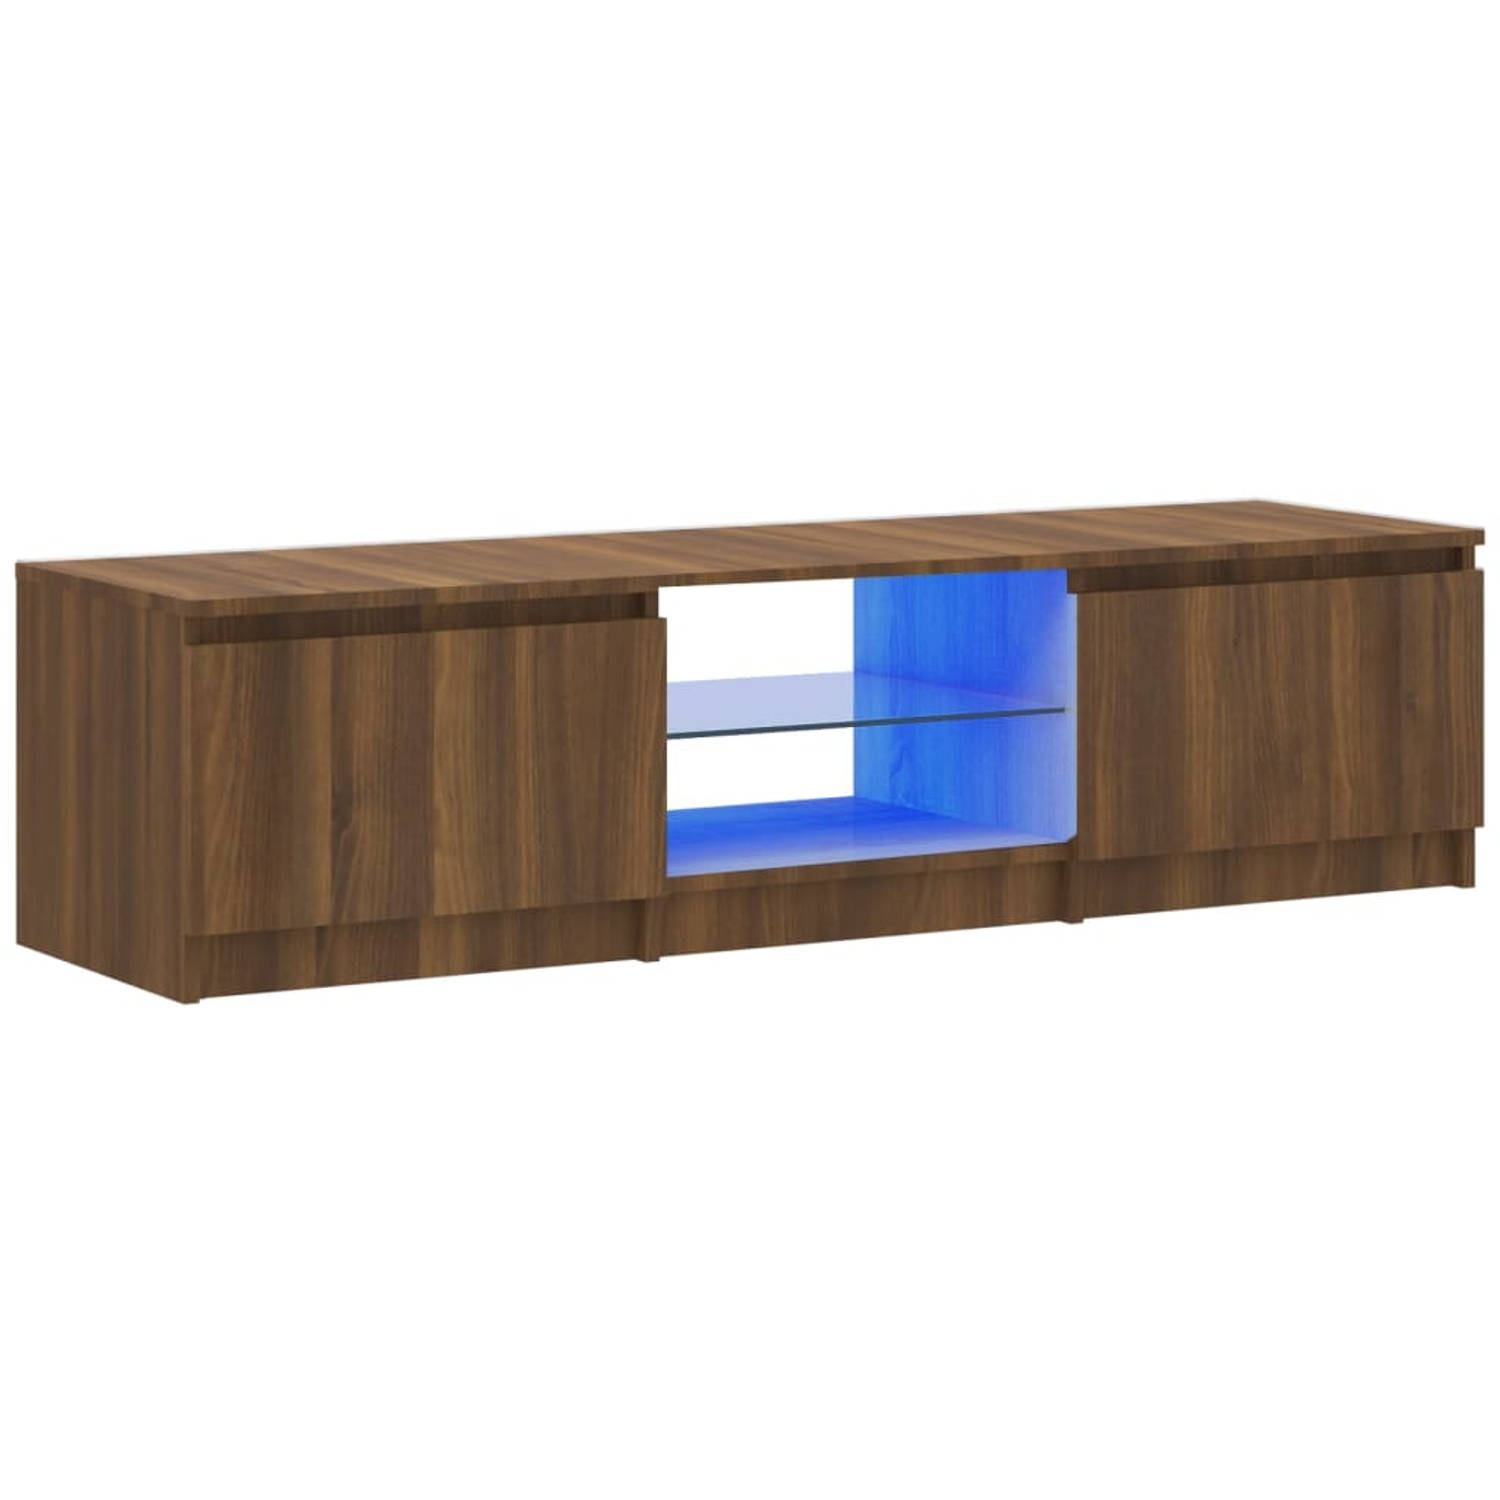 The Living Store Tv-meubel LED-verlichting - Hout - 140x40x35.5 cm - RGB